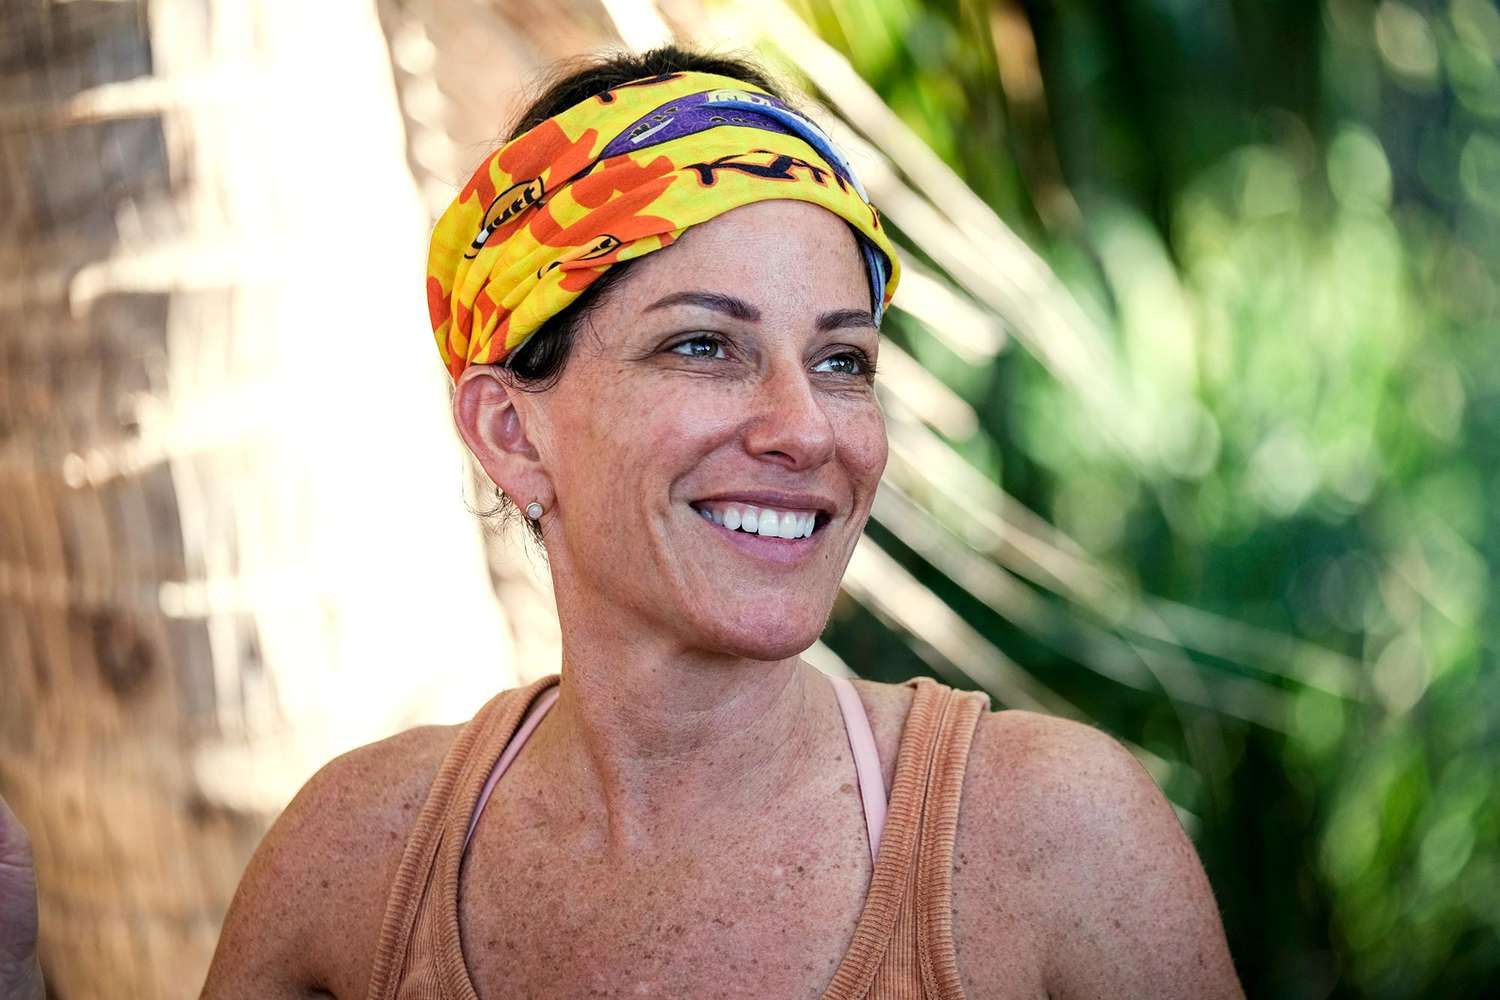 Survivor Julie Rosenberg had fire coral extracted from her leg